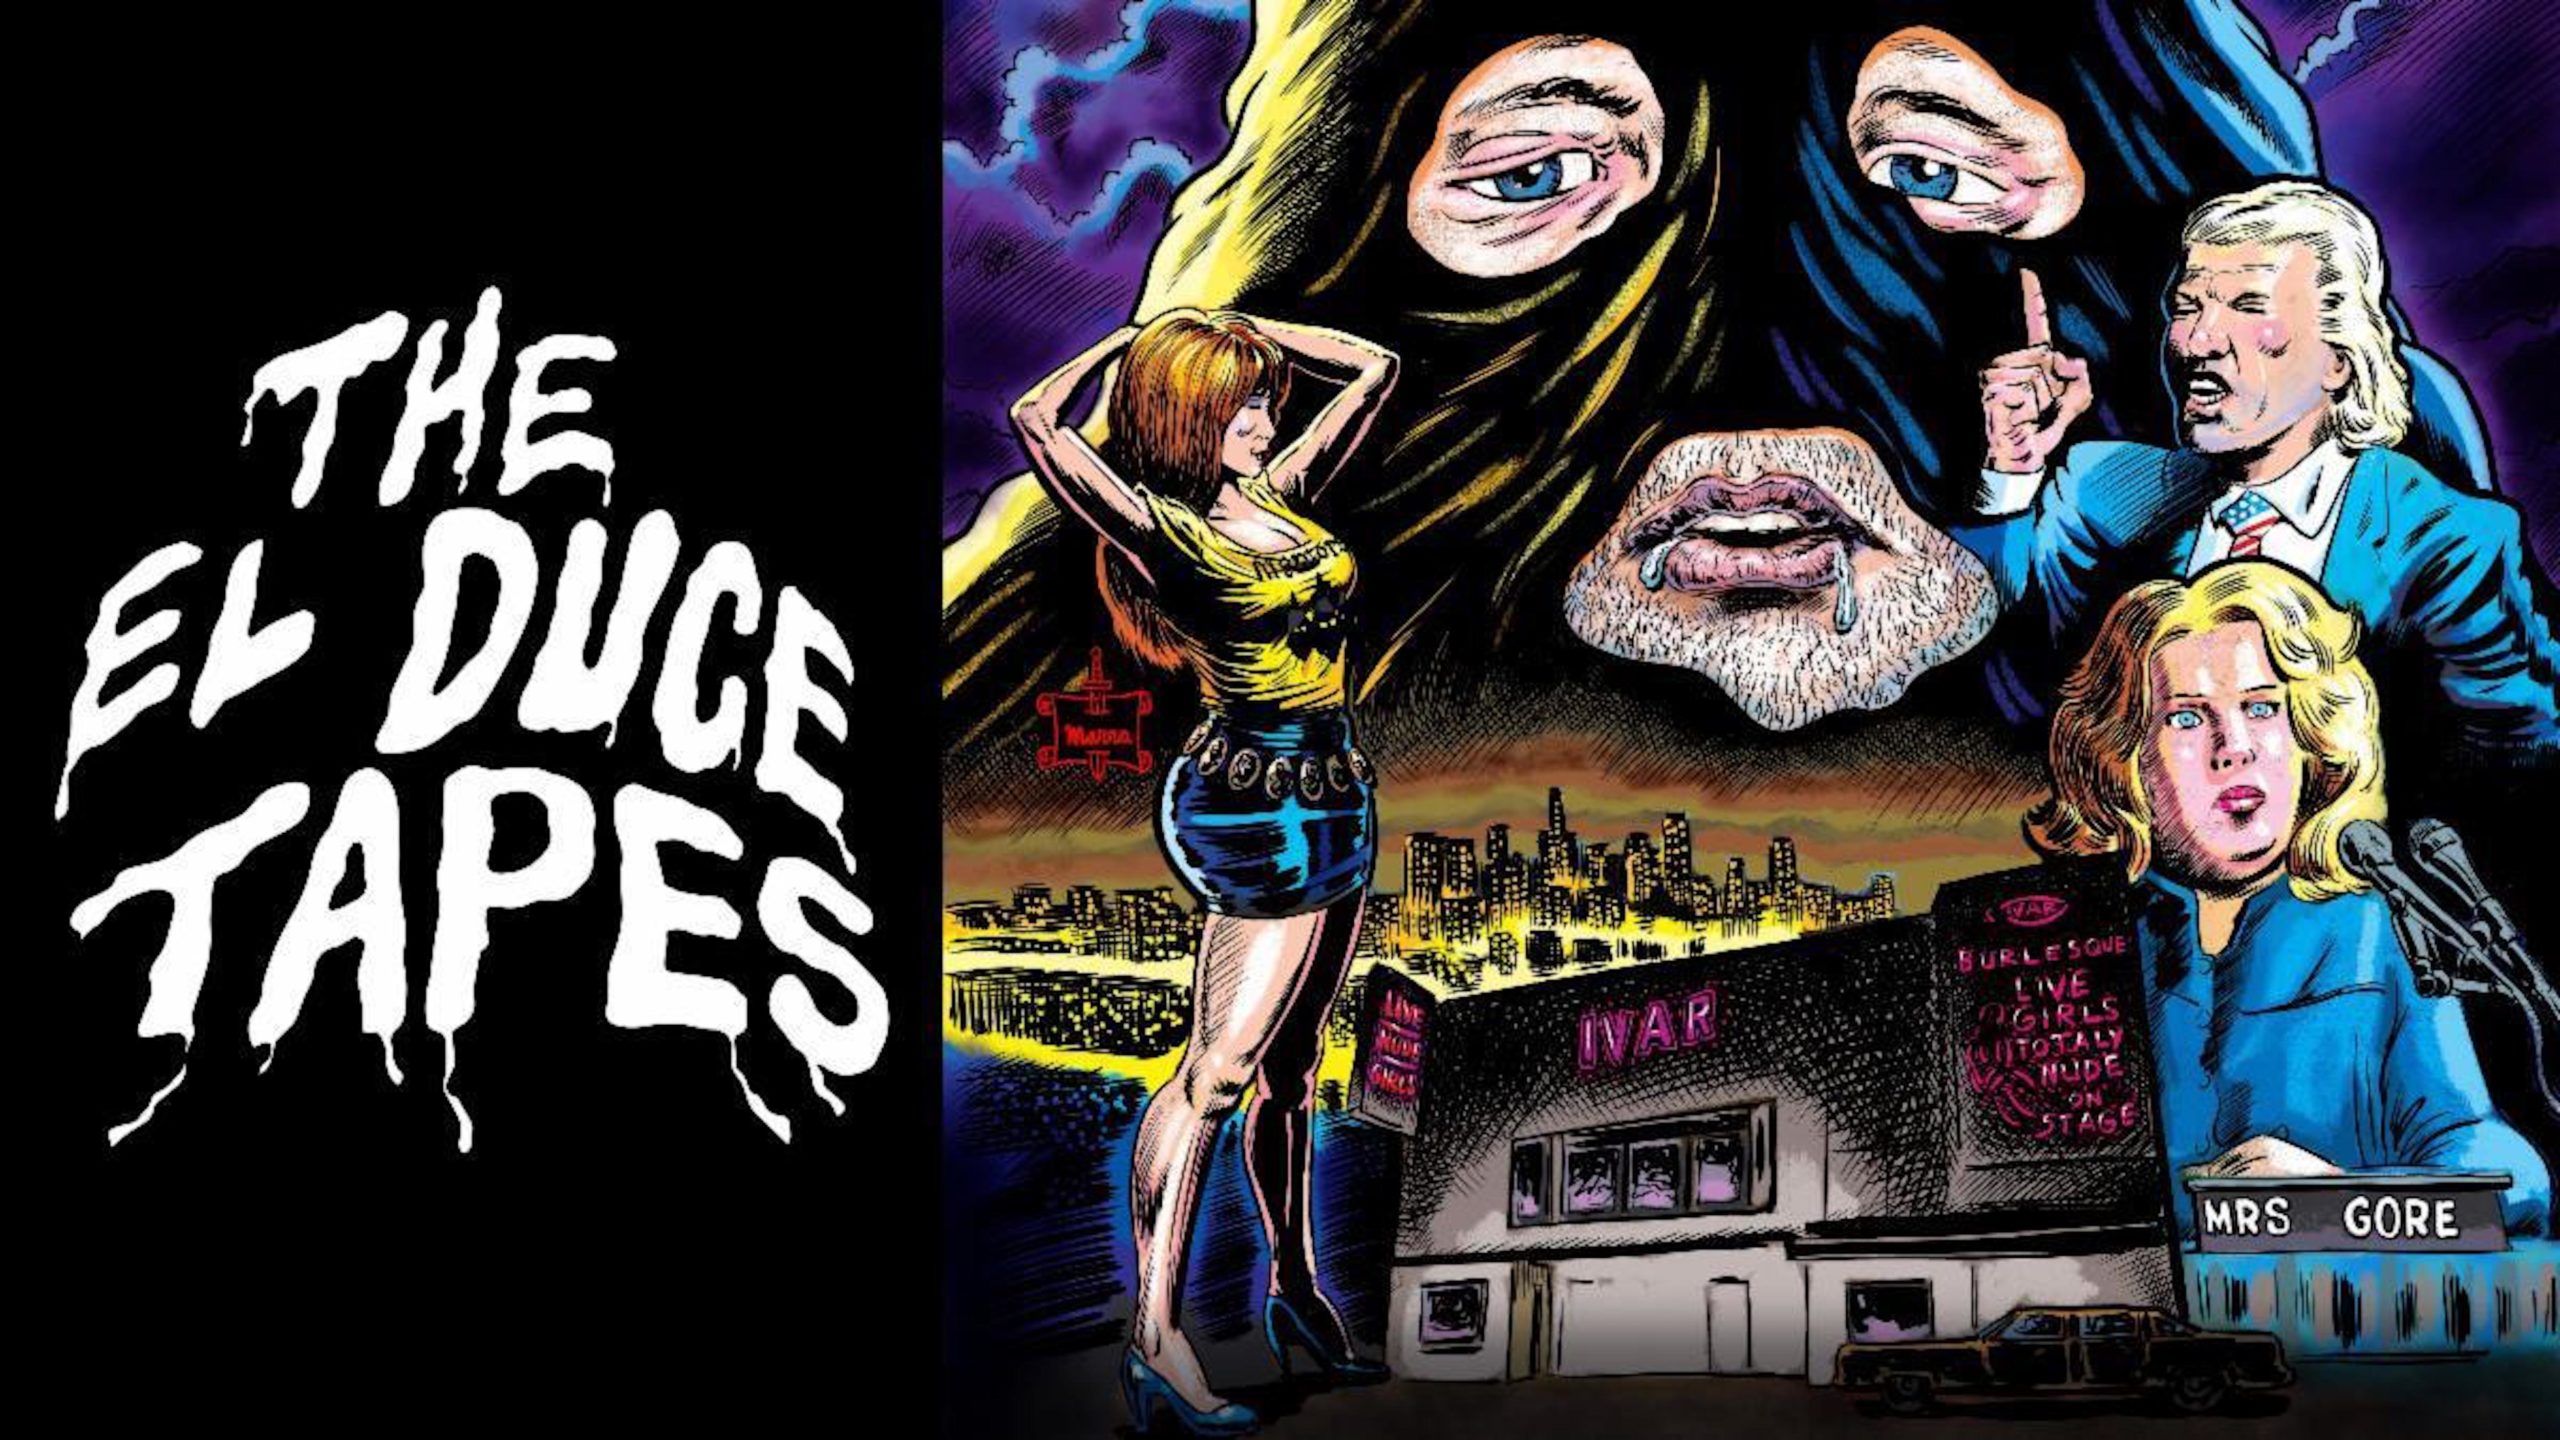 The El Duce Tapes: A Shock Rock Doc On A Masked Mentor [Exclusive Interview]